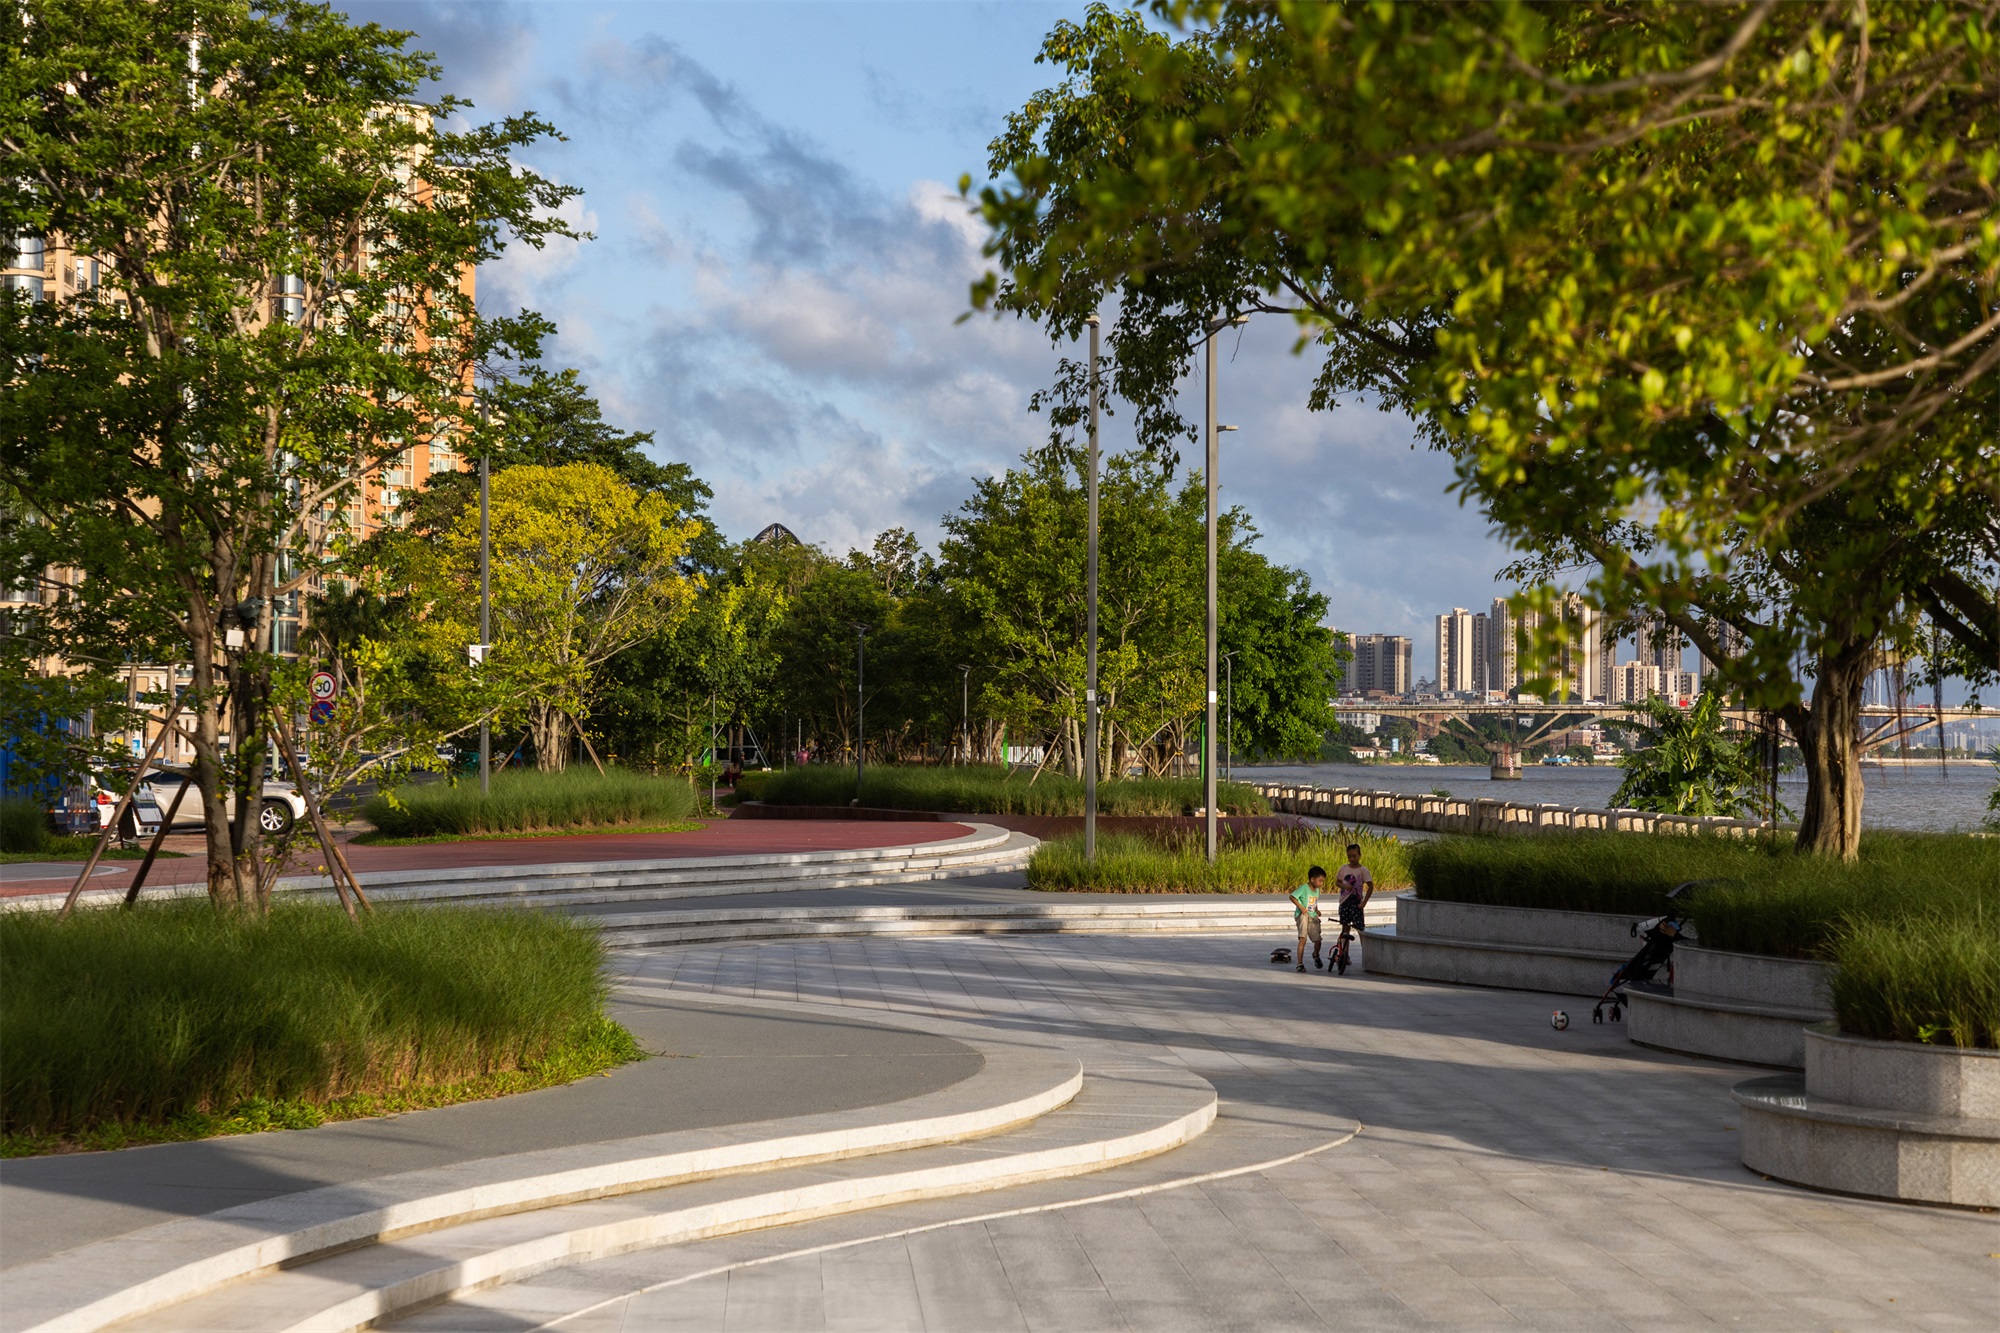 The Landscape Design of Dongti Road Waterfront Project by KMCM